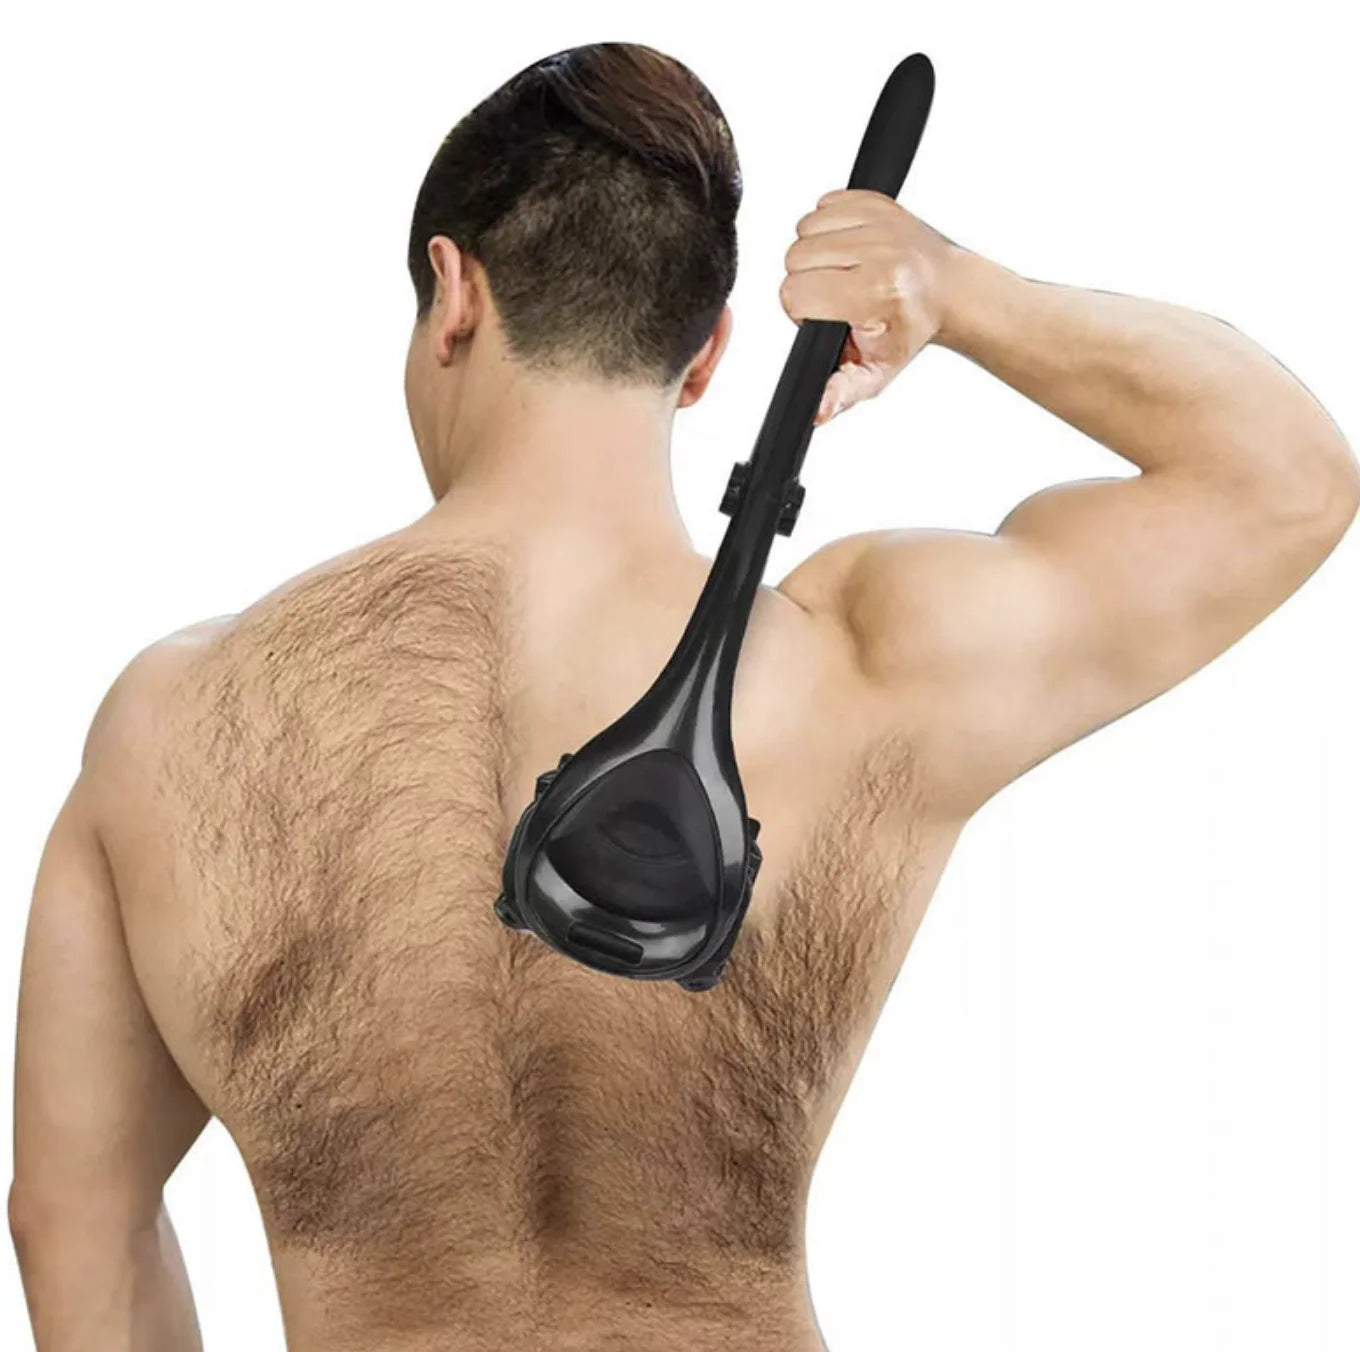 Back And Body Shaver